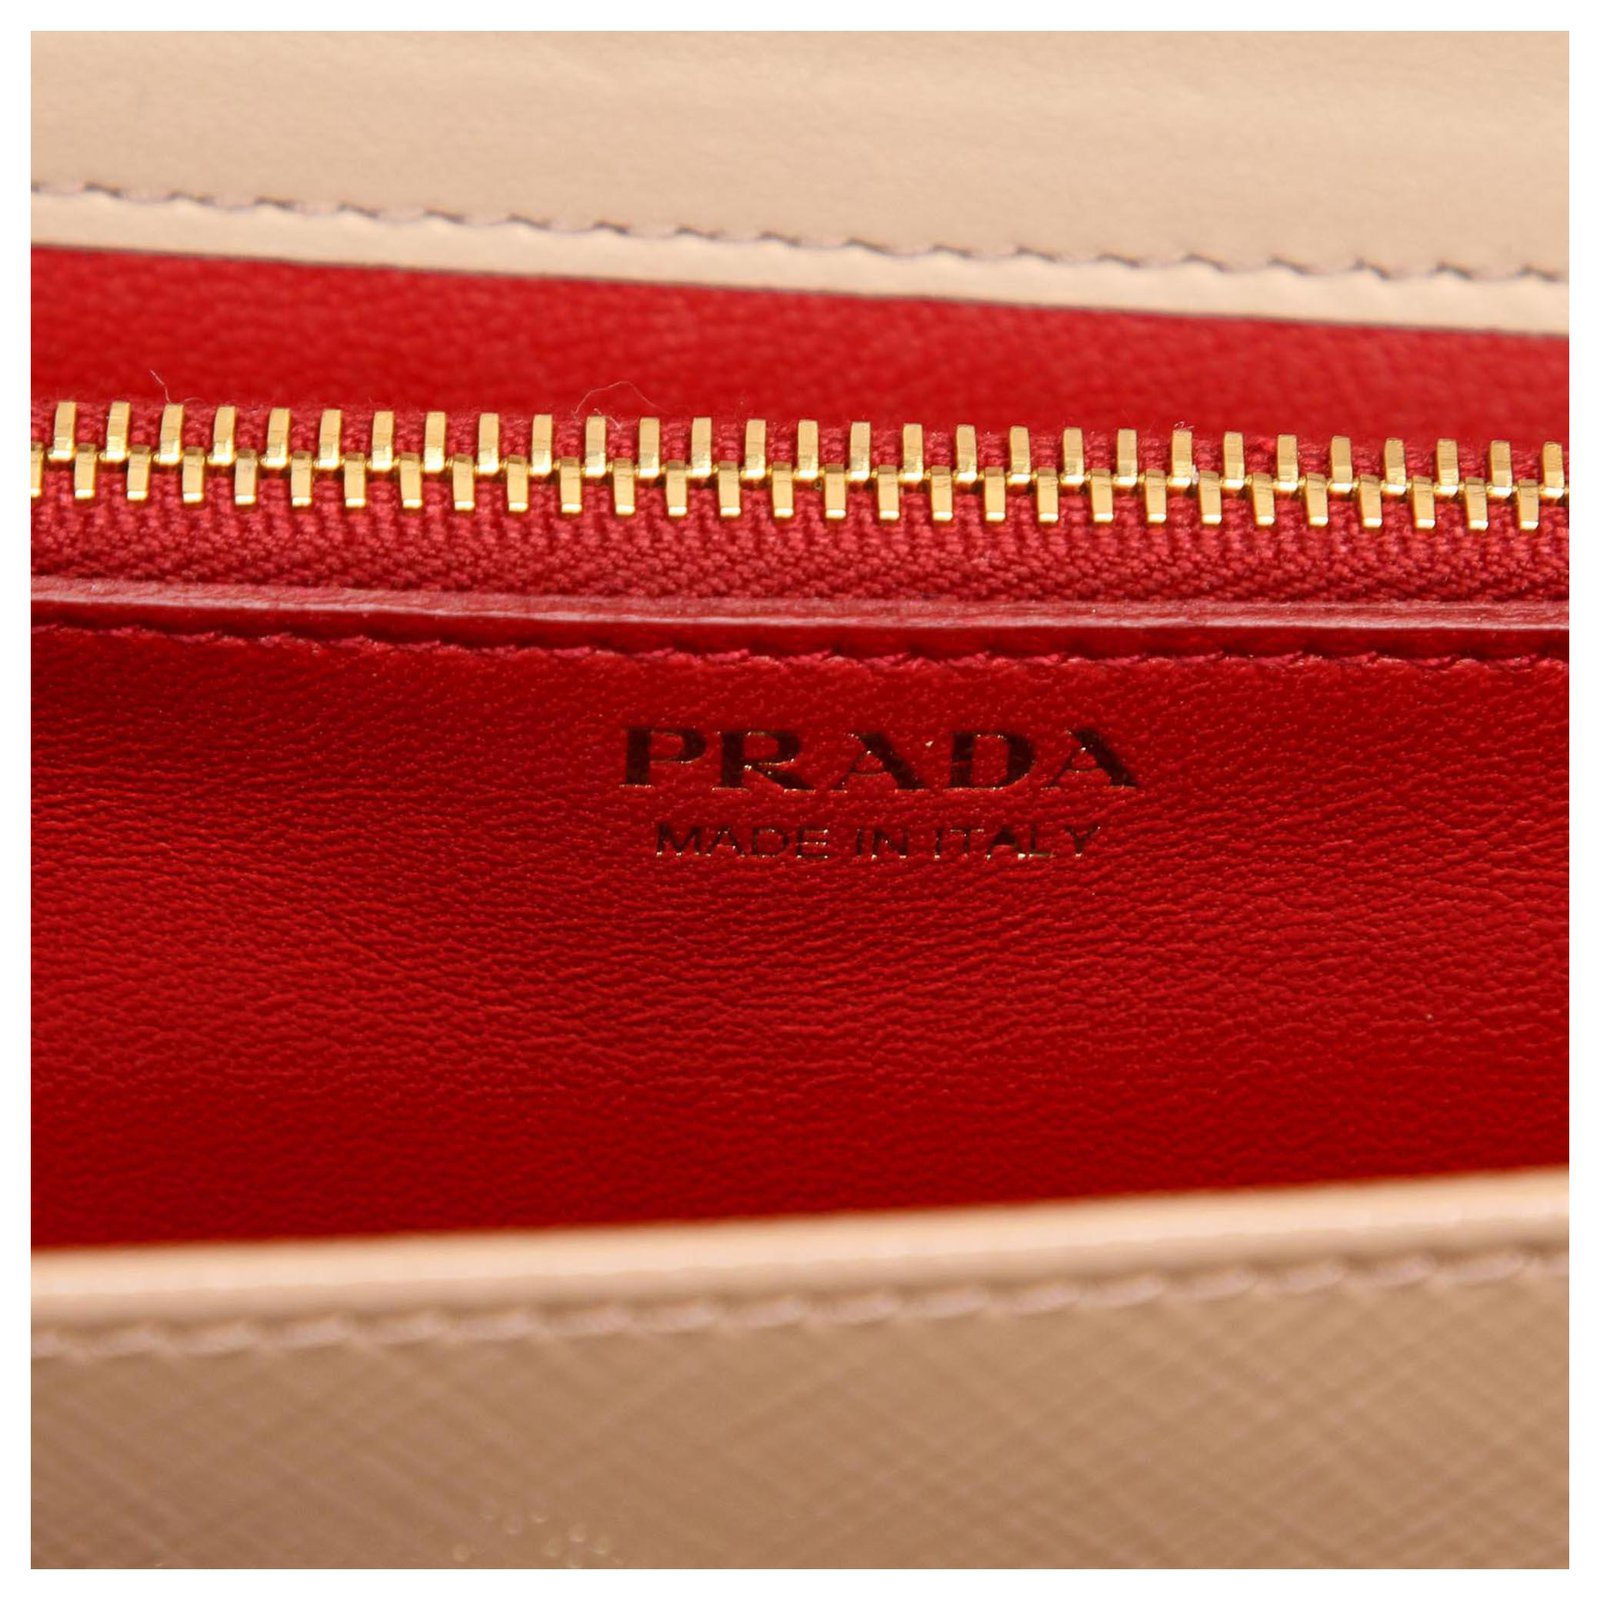 Prada Brown Saffiano Wallet On Chain Beige Leather Pony-style